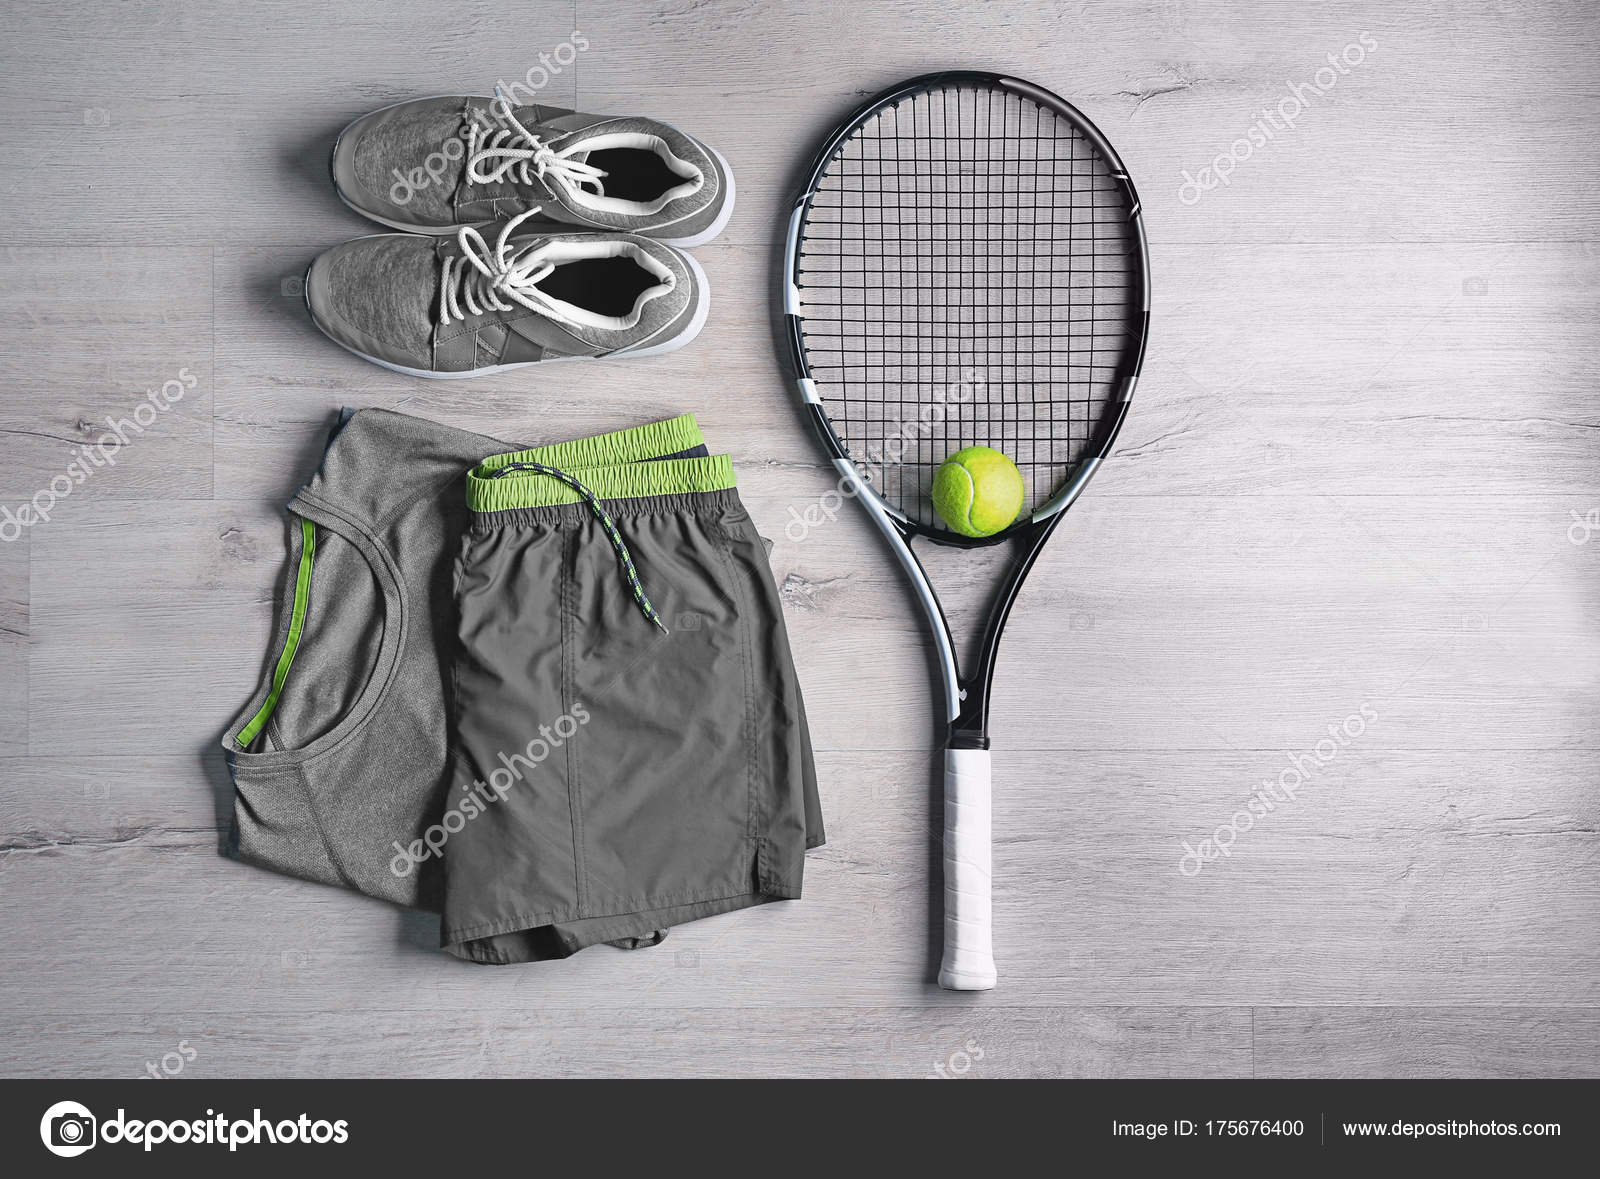 Tennis racket, ball, clothes and shoes on wooden background Stock Photo by ©belchonock 175676400